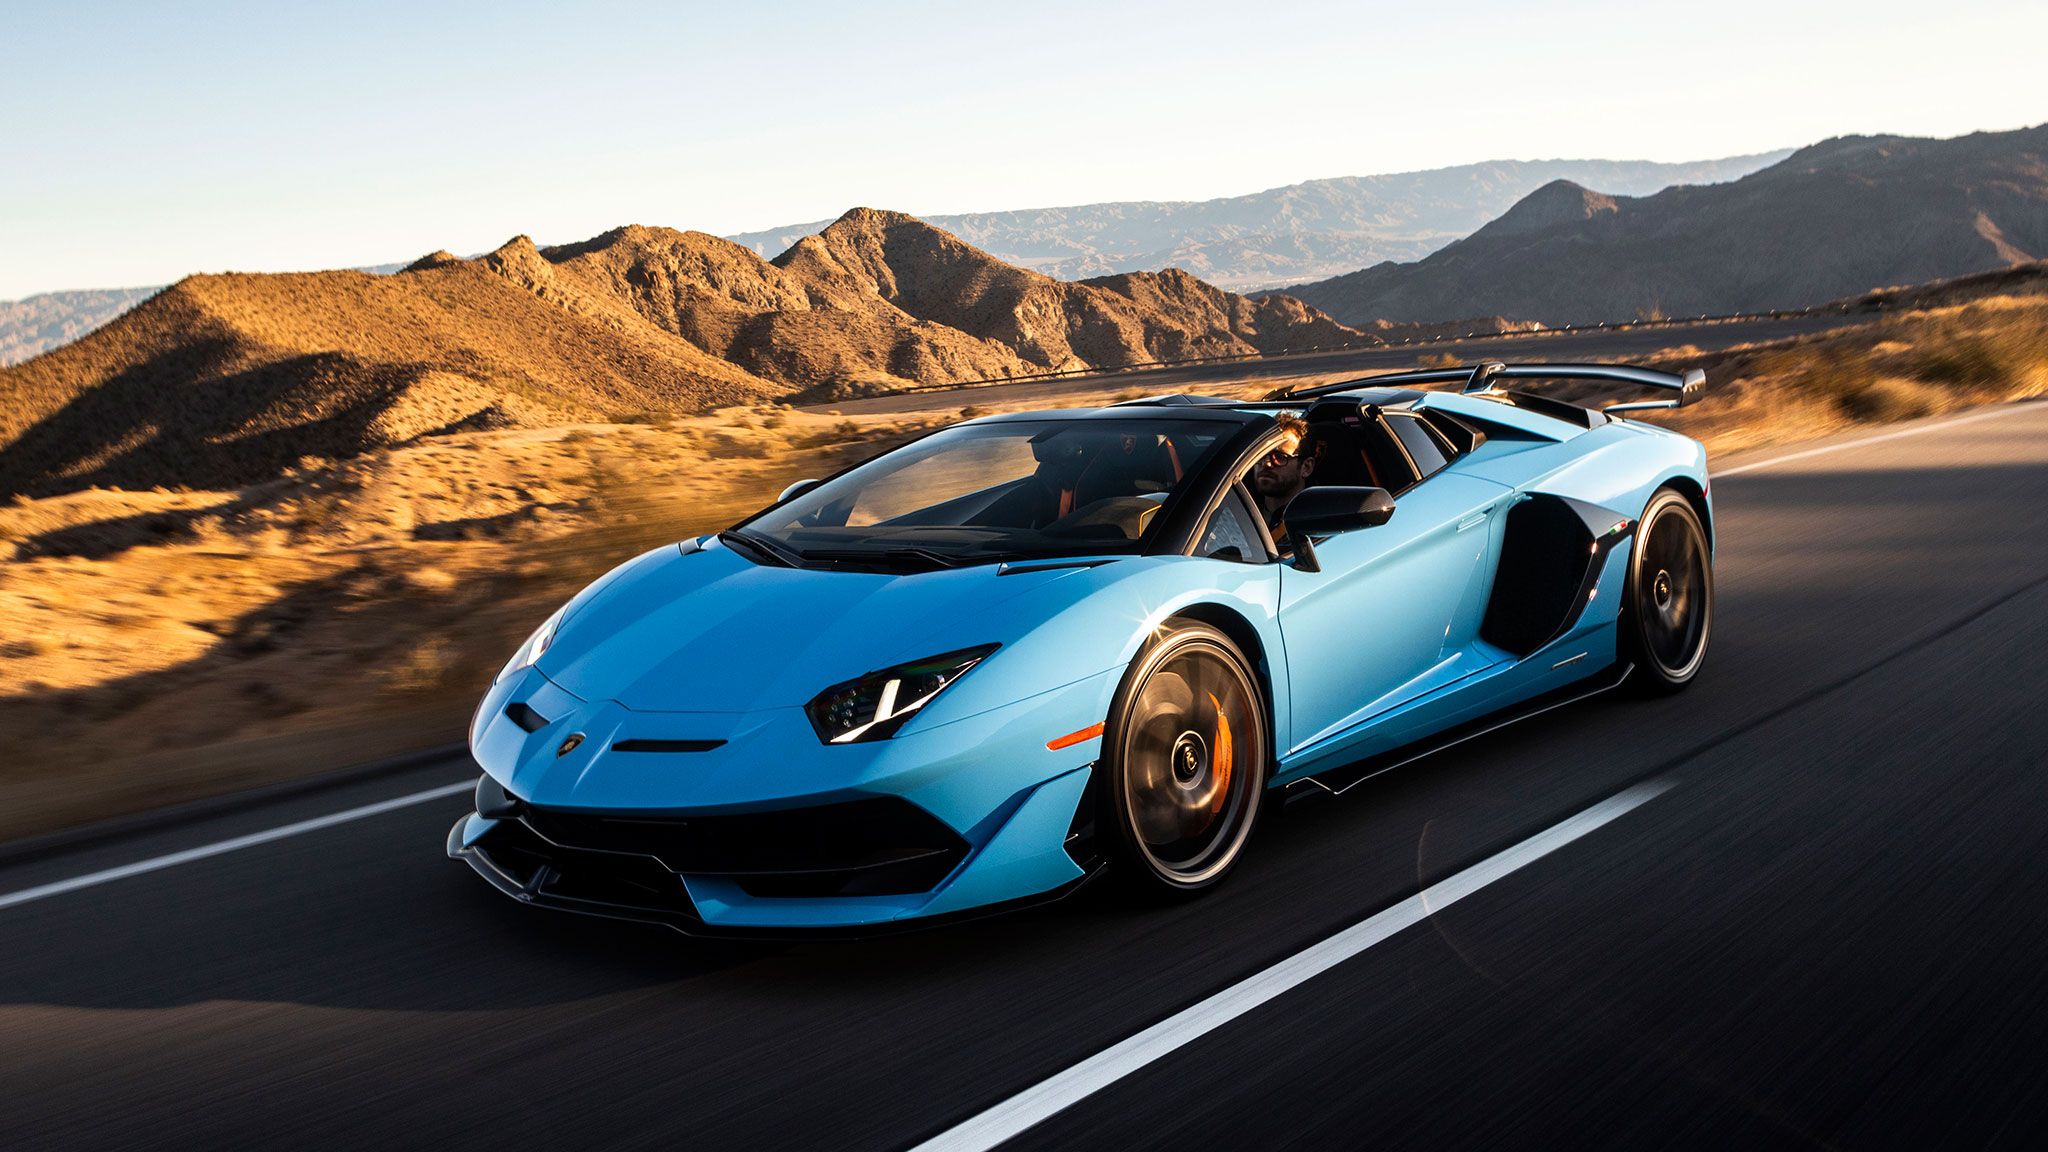 How Much Is a Lamborghini? Here's a Price Breakdown